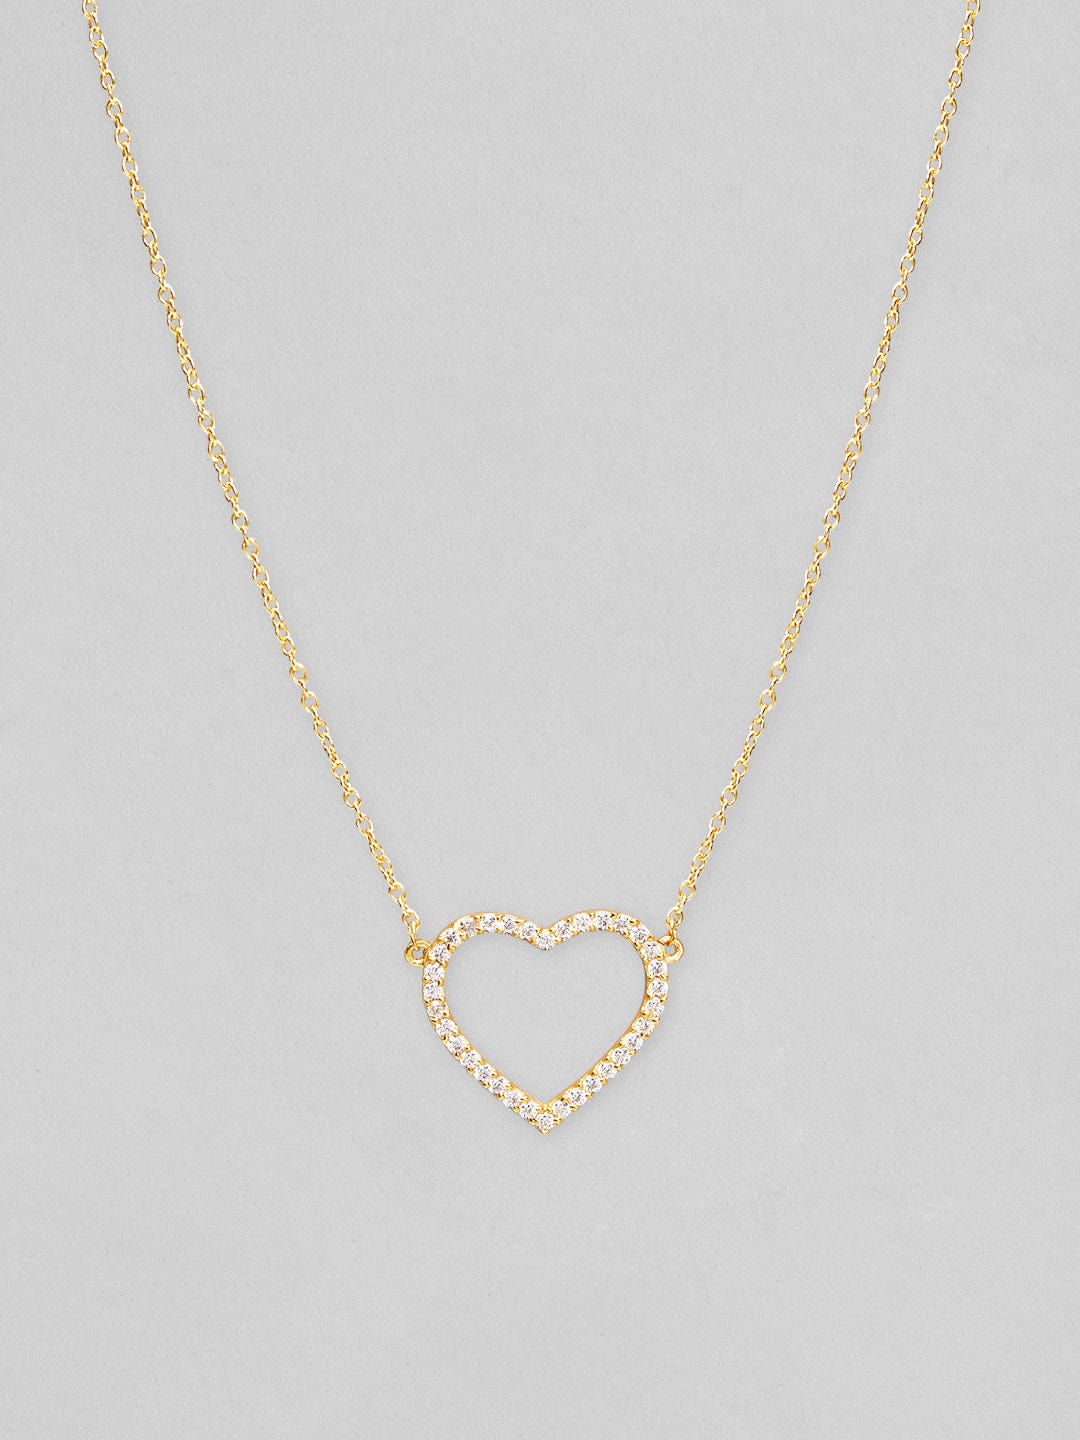 Rubans 925 Silver Glitters To The Heart Pendant Necklace - Gold Plated Chain & Necklaces